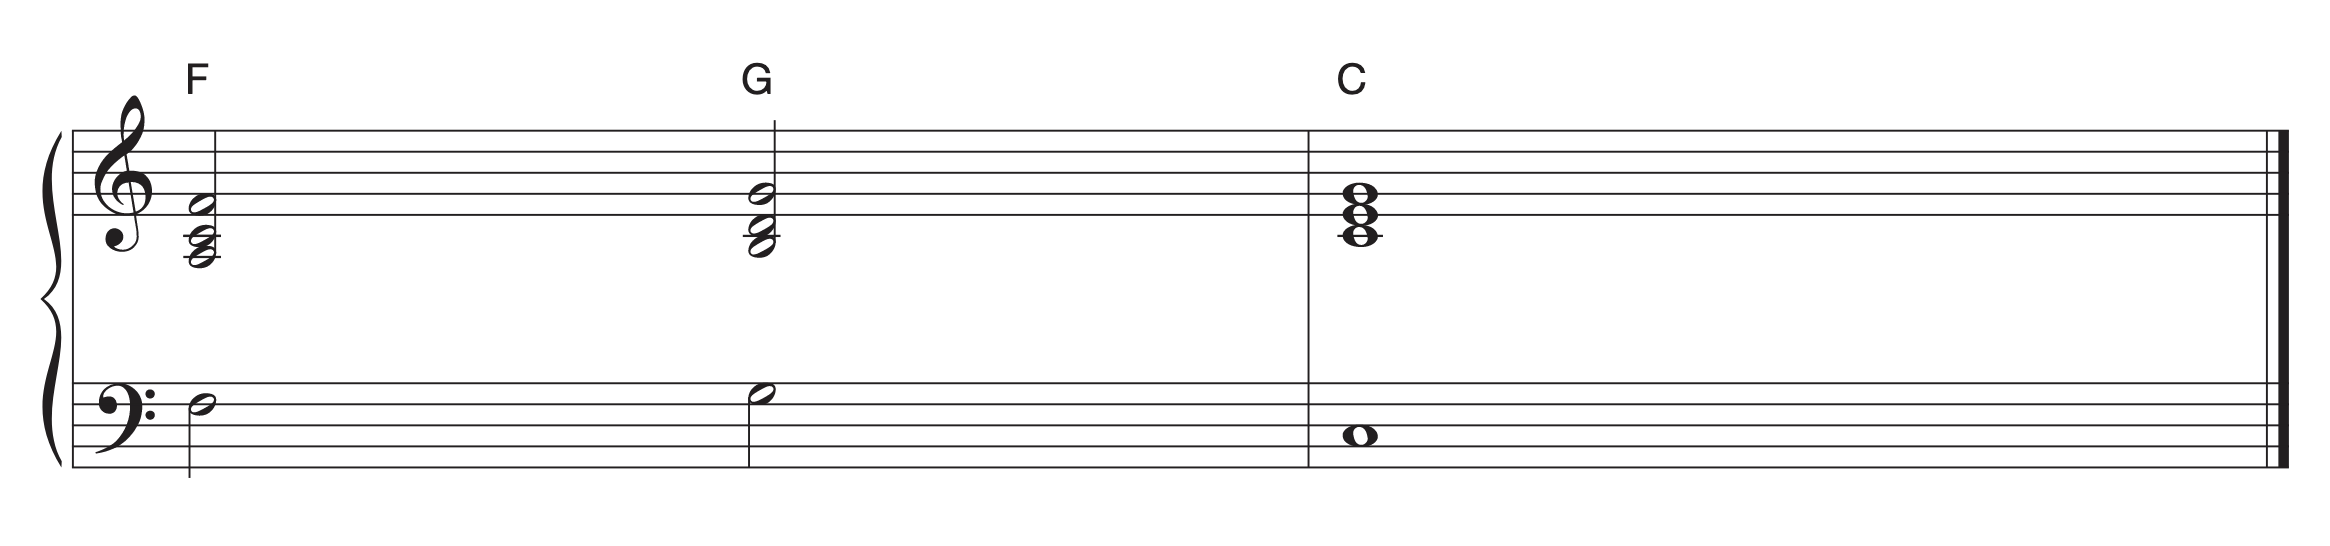 Pictured in music notation are three-way close triads with voice leading.